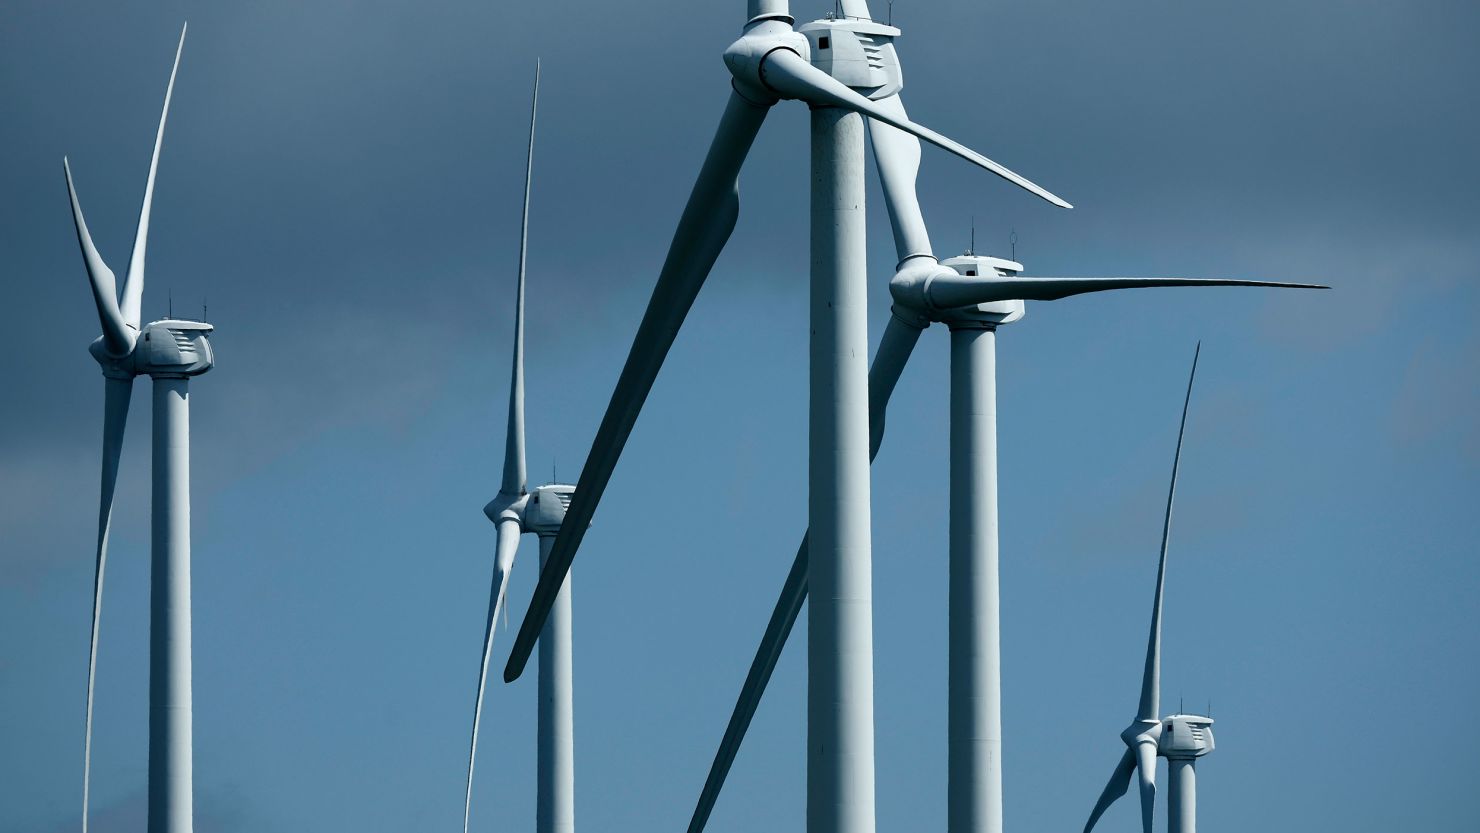 Rich, white communities most likely to oppose wind farms, study